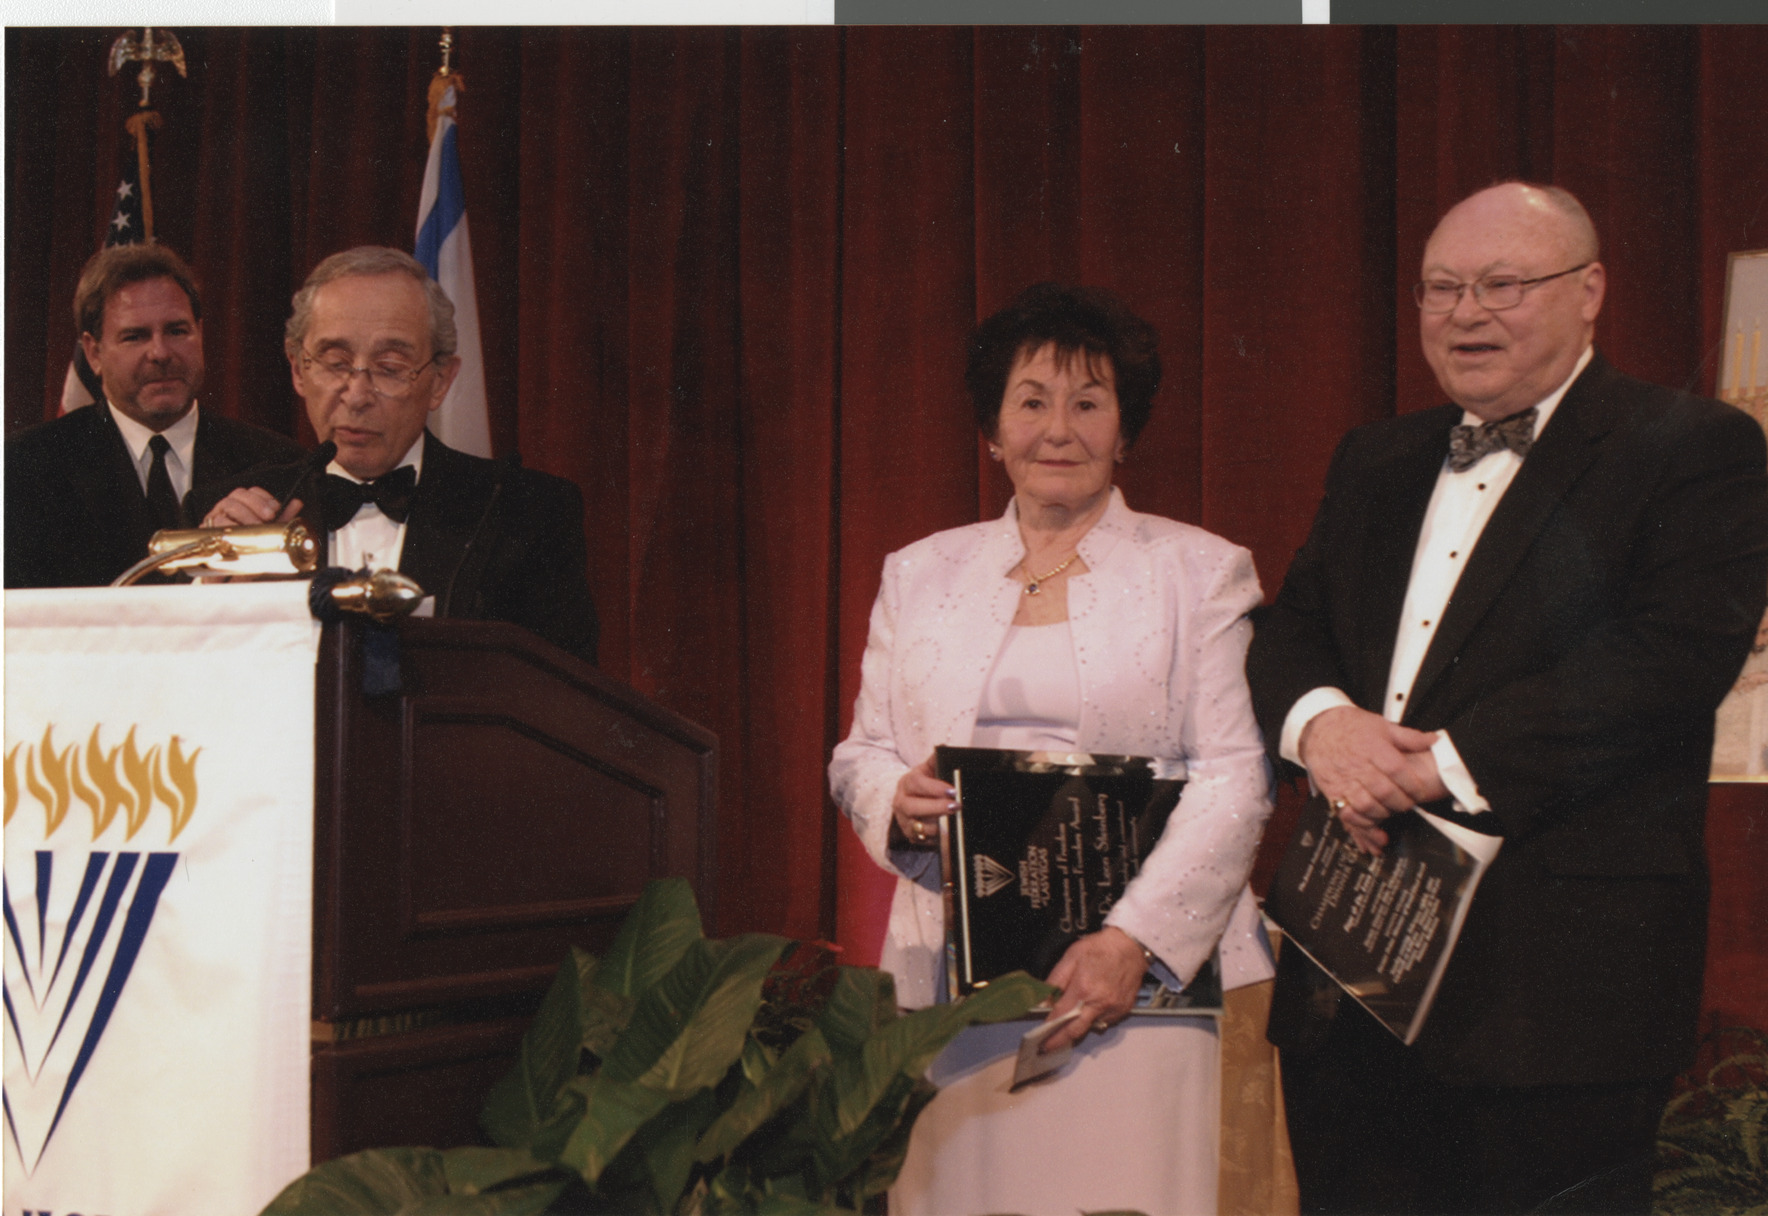 Photograph of Faye and Dr. Leon Steinberg at the Freedom Dinner Gala, February 8, 2004